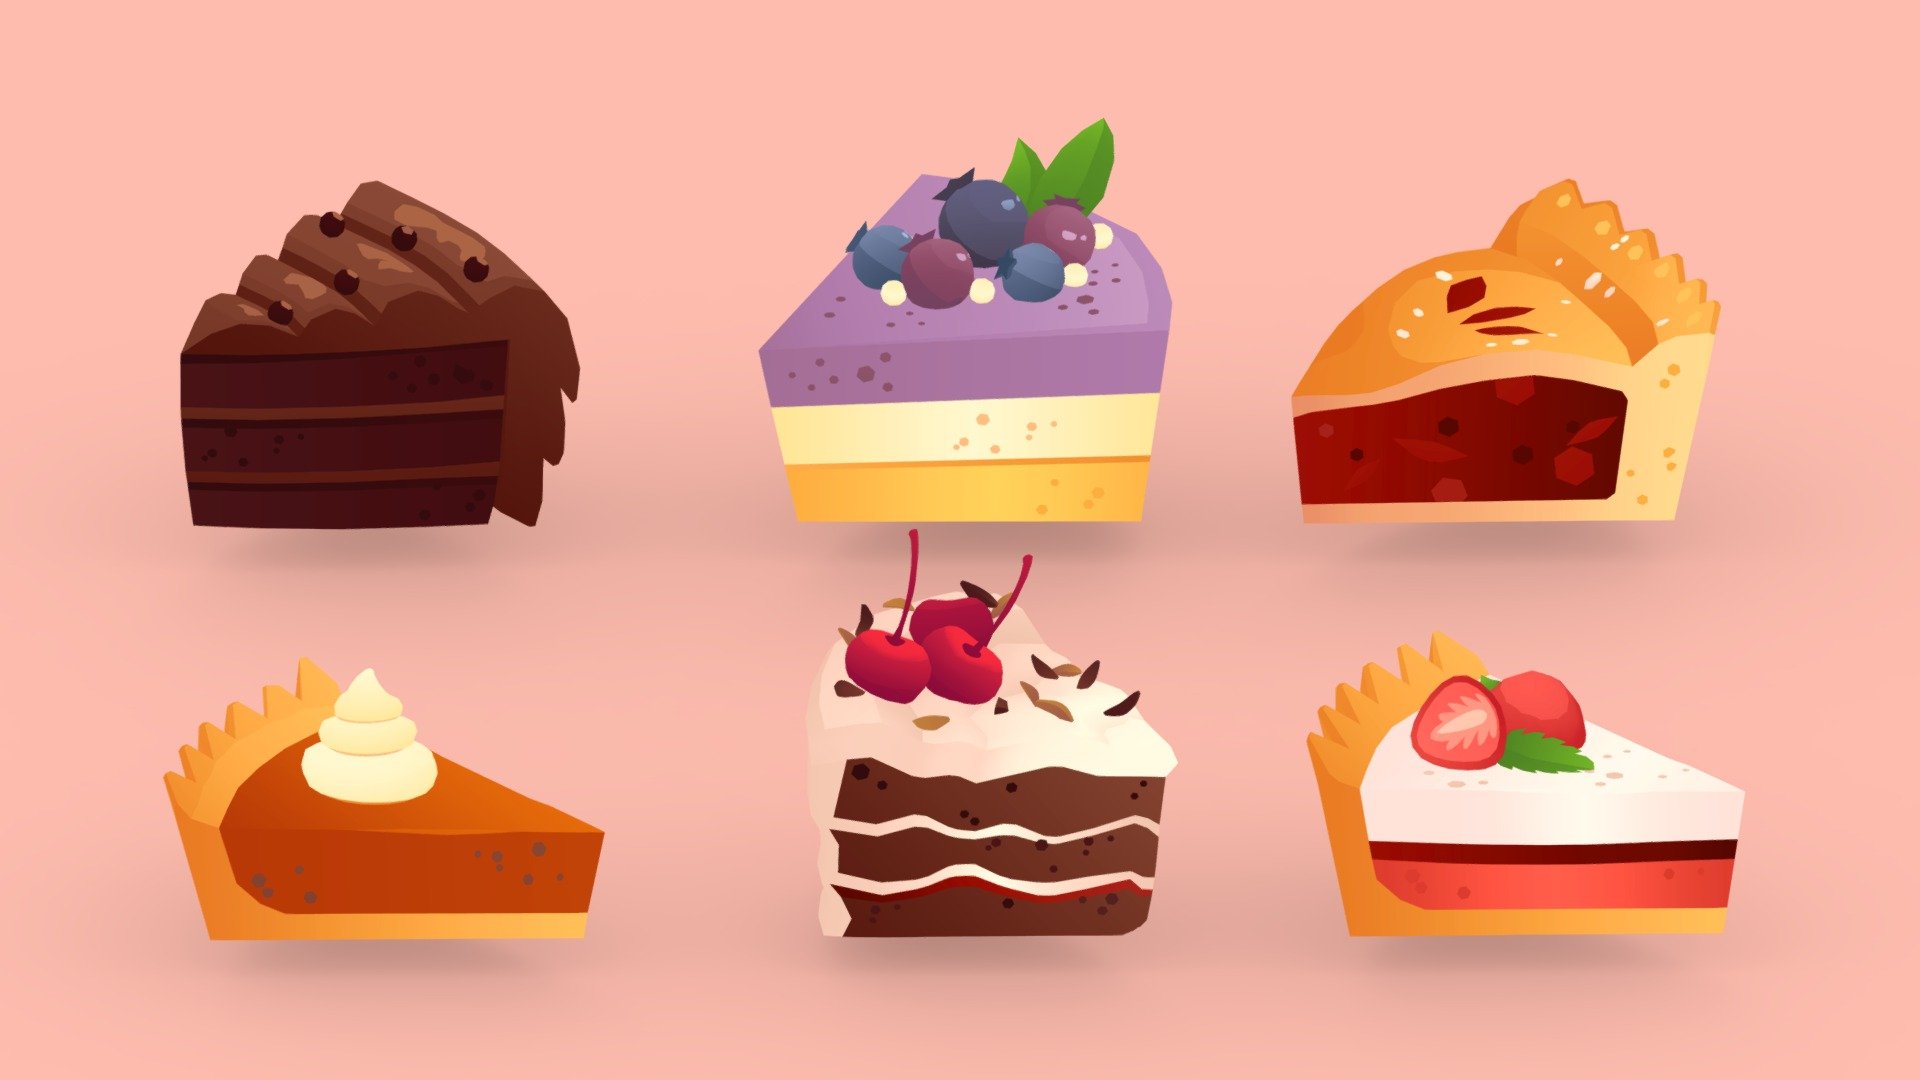 cute cakes and pies pack.

Textured with gradient atlas, so it is performant for mobile games and video games.

Like a few of my other assets in the same style, it uses a single texture diffuse map and is mapped using only color gradients. 
All gradient textures can be extended and combined to a large atlas.

There are more assets in this style to add to your game scene or environment. Check out my sale.

If you want to change the colors of the assets, you just need to move the UVs on the atlas to a different gradient.
Or contact me for changes, for a small fee.

I also accept freelance jobs. Do not hesitate to write me. 

*-------------Terms of Use--------------

Commercial use of the assets  provided is permitted but cannot be included in an asset pack or sold at any sort of asset/resource marketplace.*

9213140

5207418 - Cartoon Cakes And Pies - Buy Royalty Free 3D model by Stylized Box (@Stylized_Box) 3d model